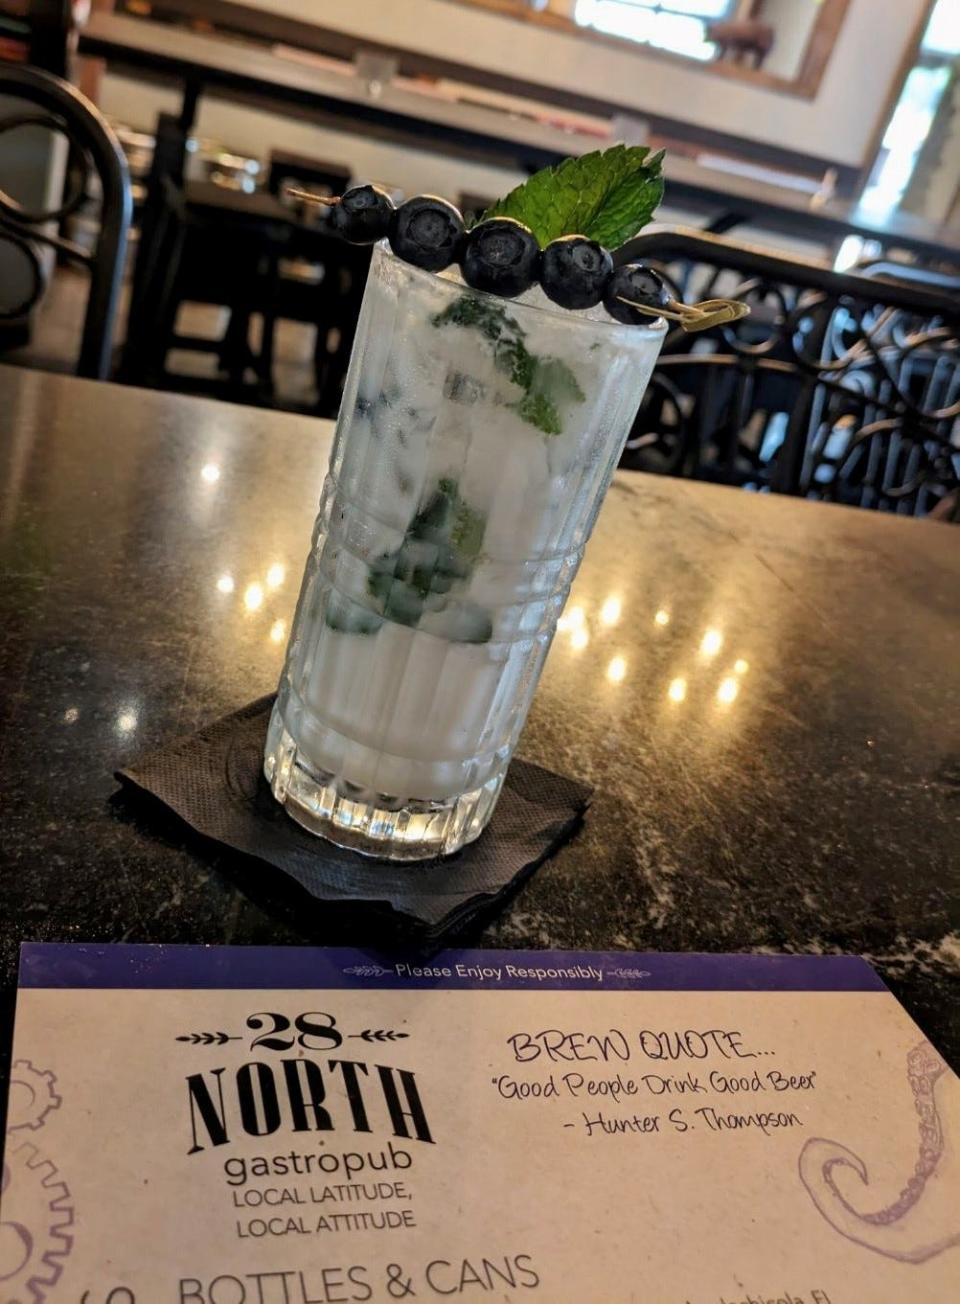 The creamy Mint Condition at 28 North Gastropub at the Avenue Viera is something between a mojito and a pina colada.